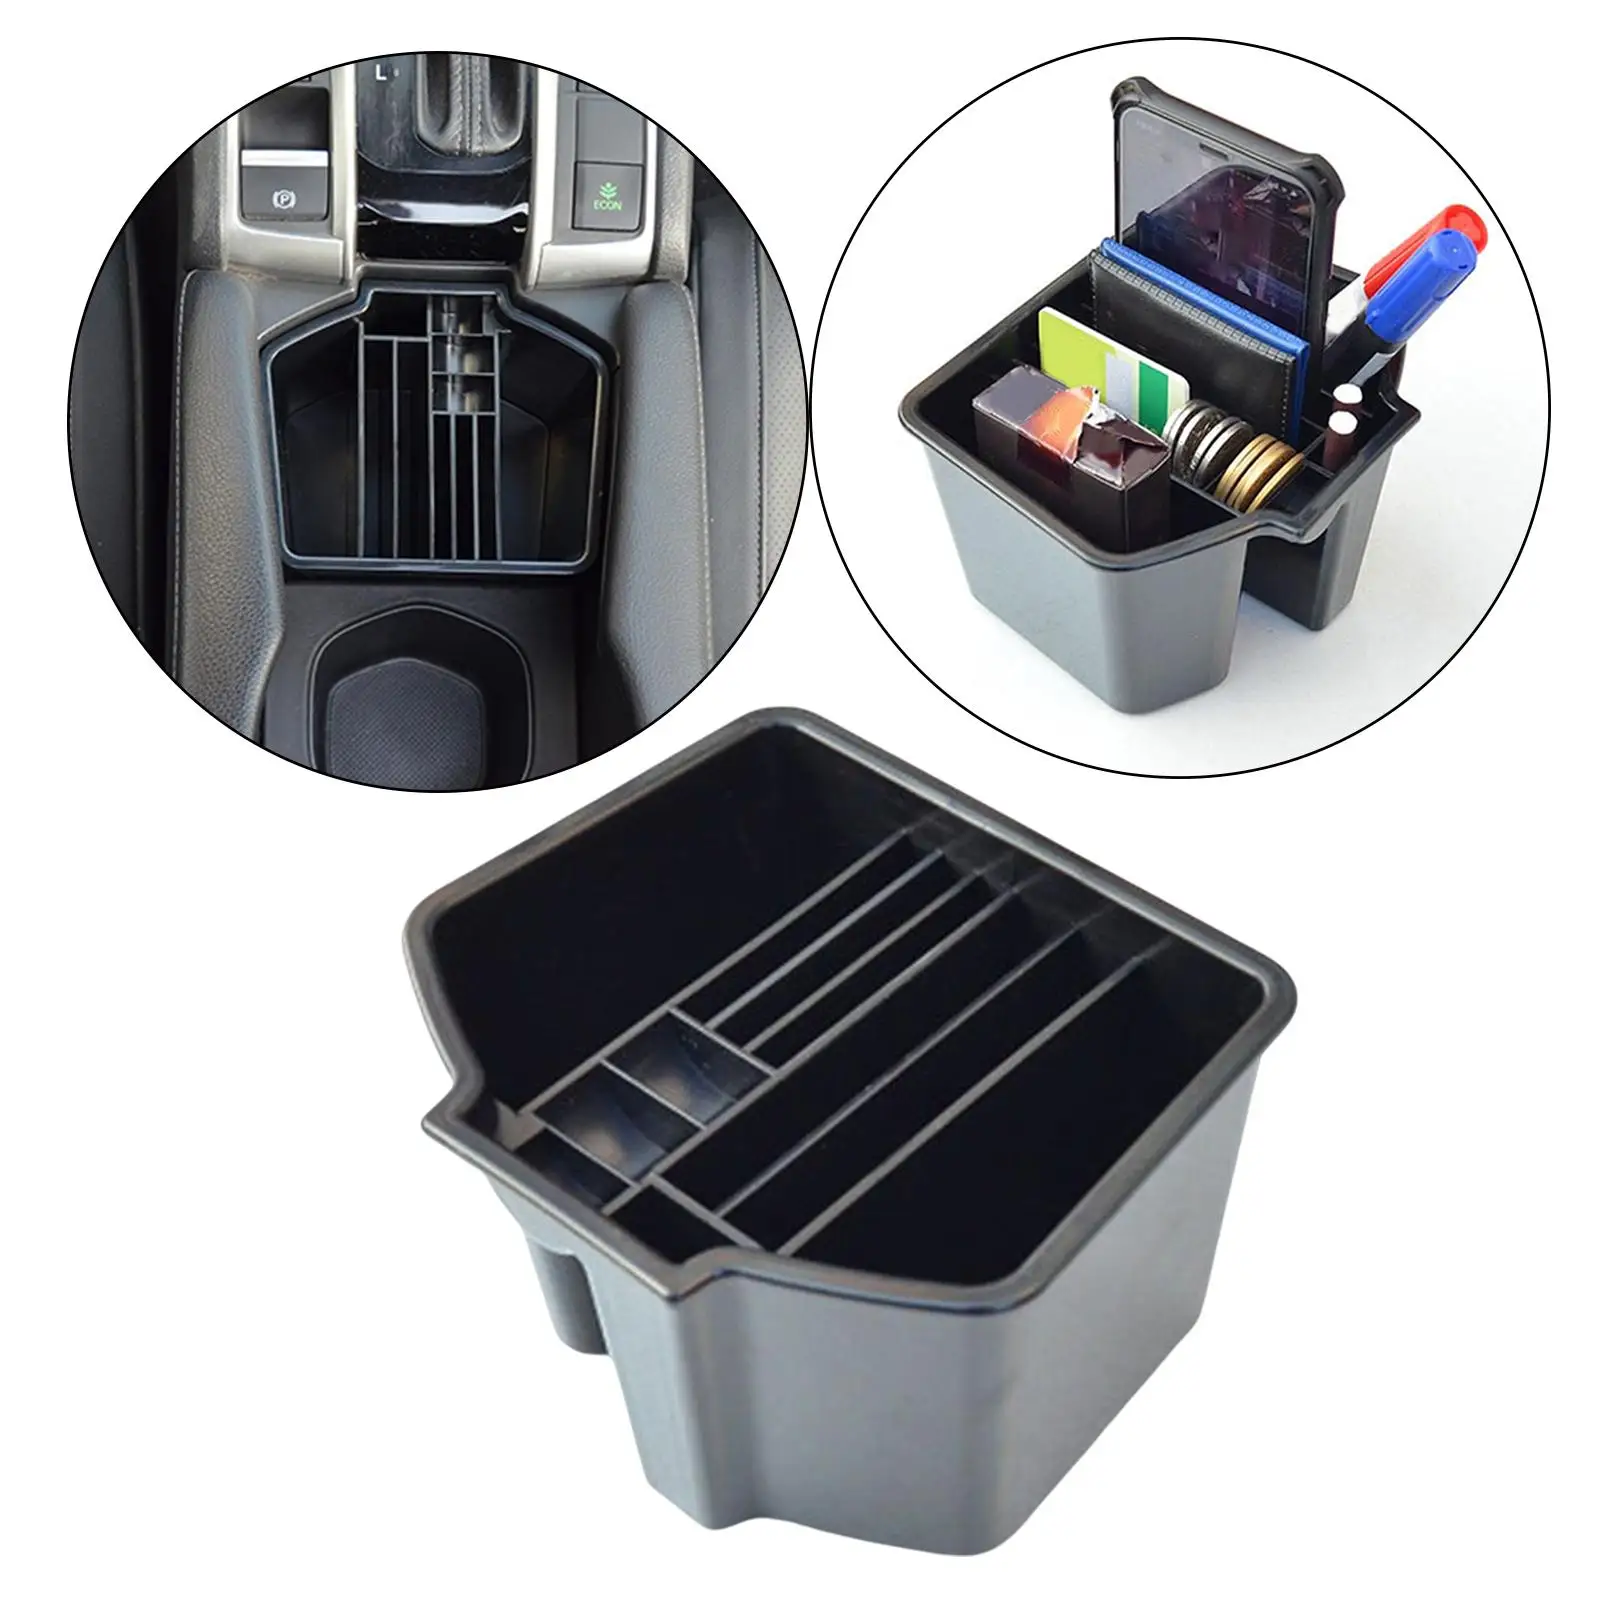 Console Organizer Storage Box for Honda Civic 10TH , Holding Phone, Wallet, Lipstick, Keys, Coins, Sunglass Accessories